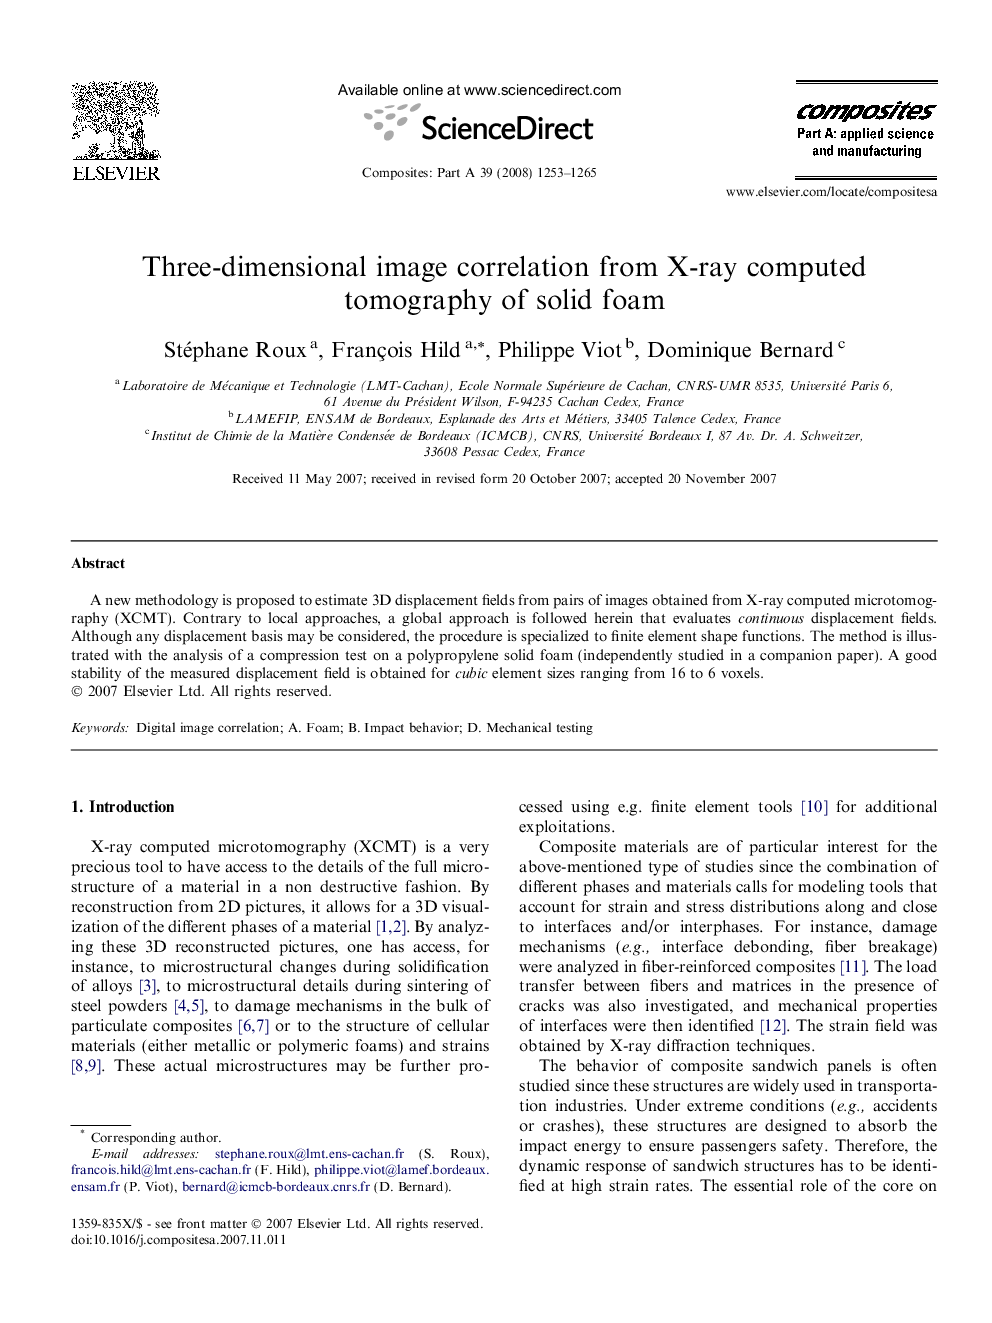 Three-dimensional image correlation from X-ray computed tomography of solid foam